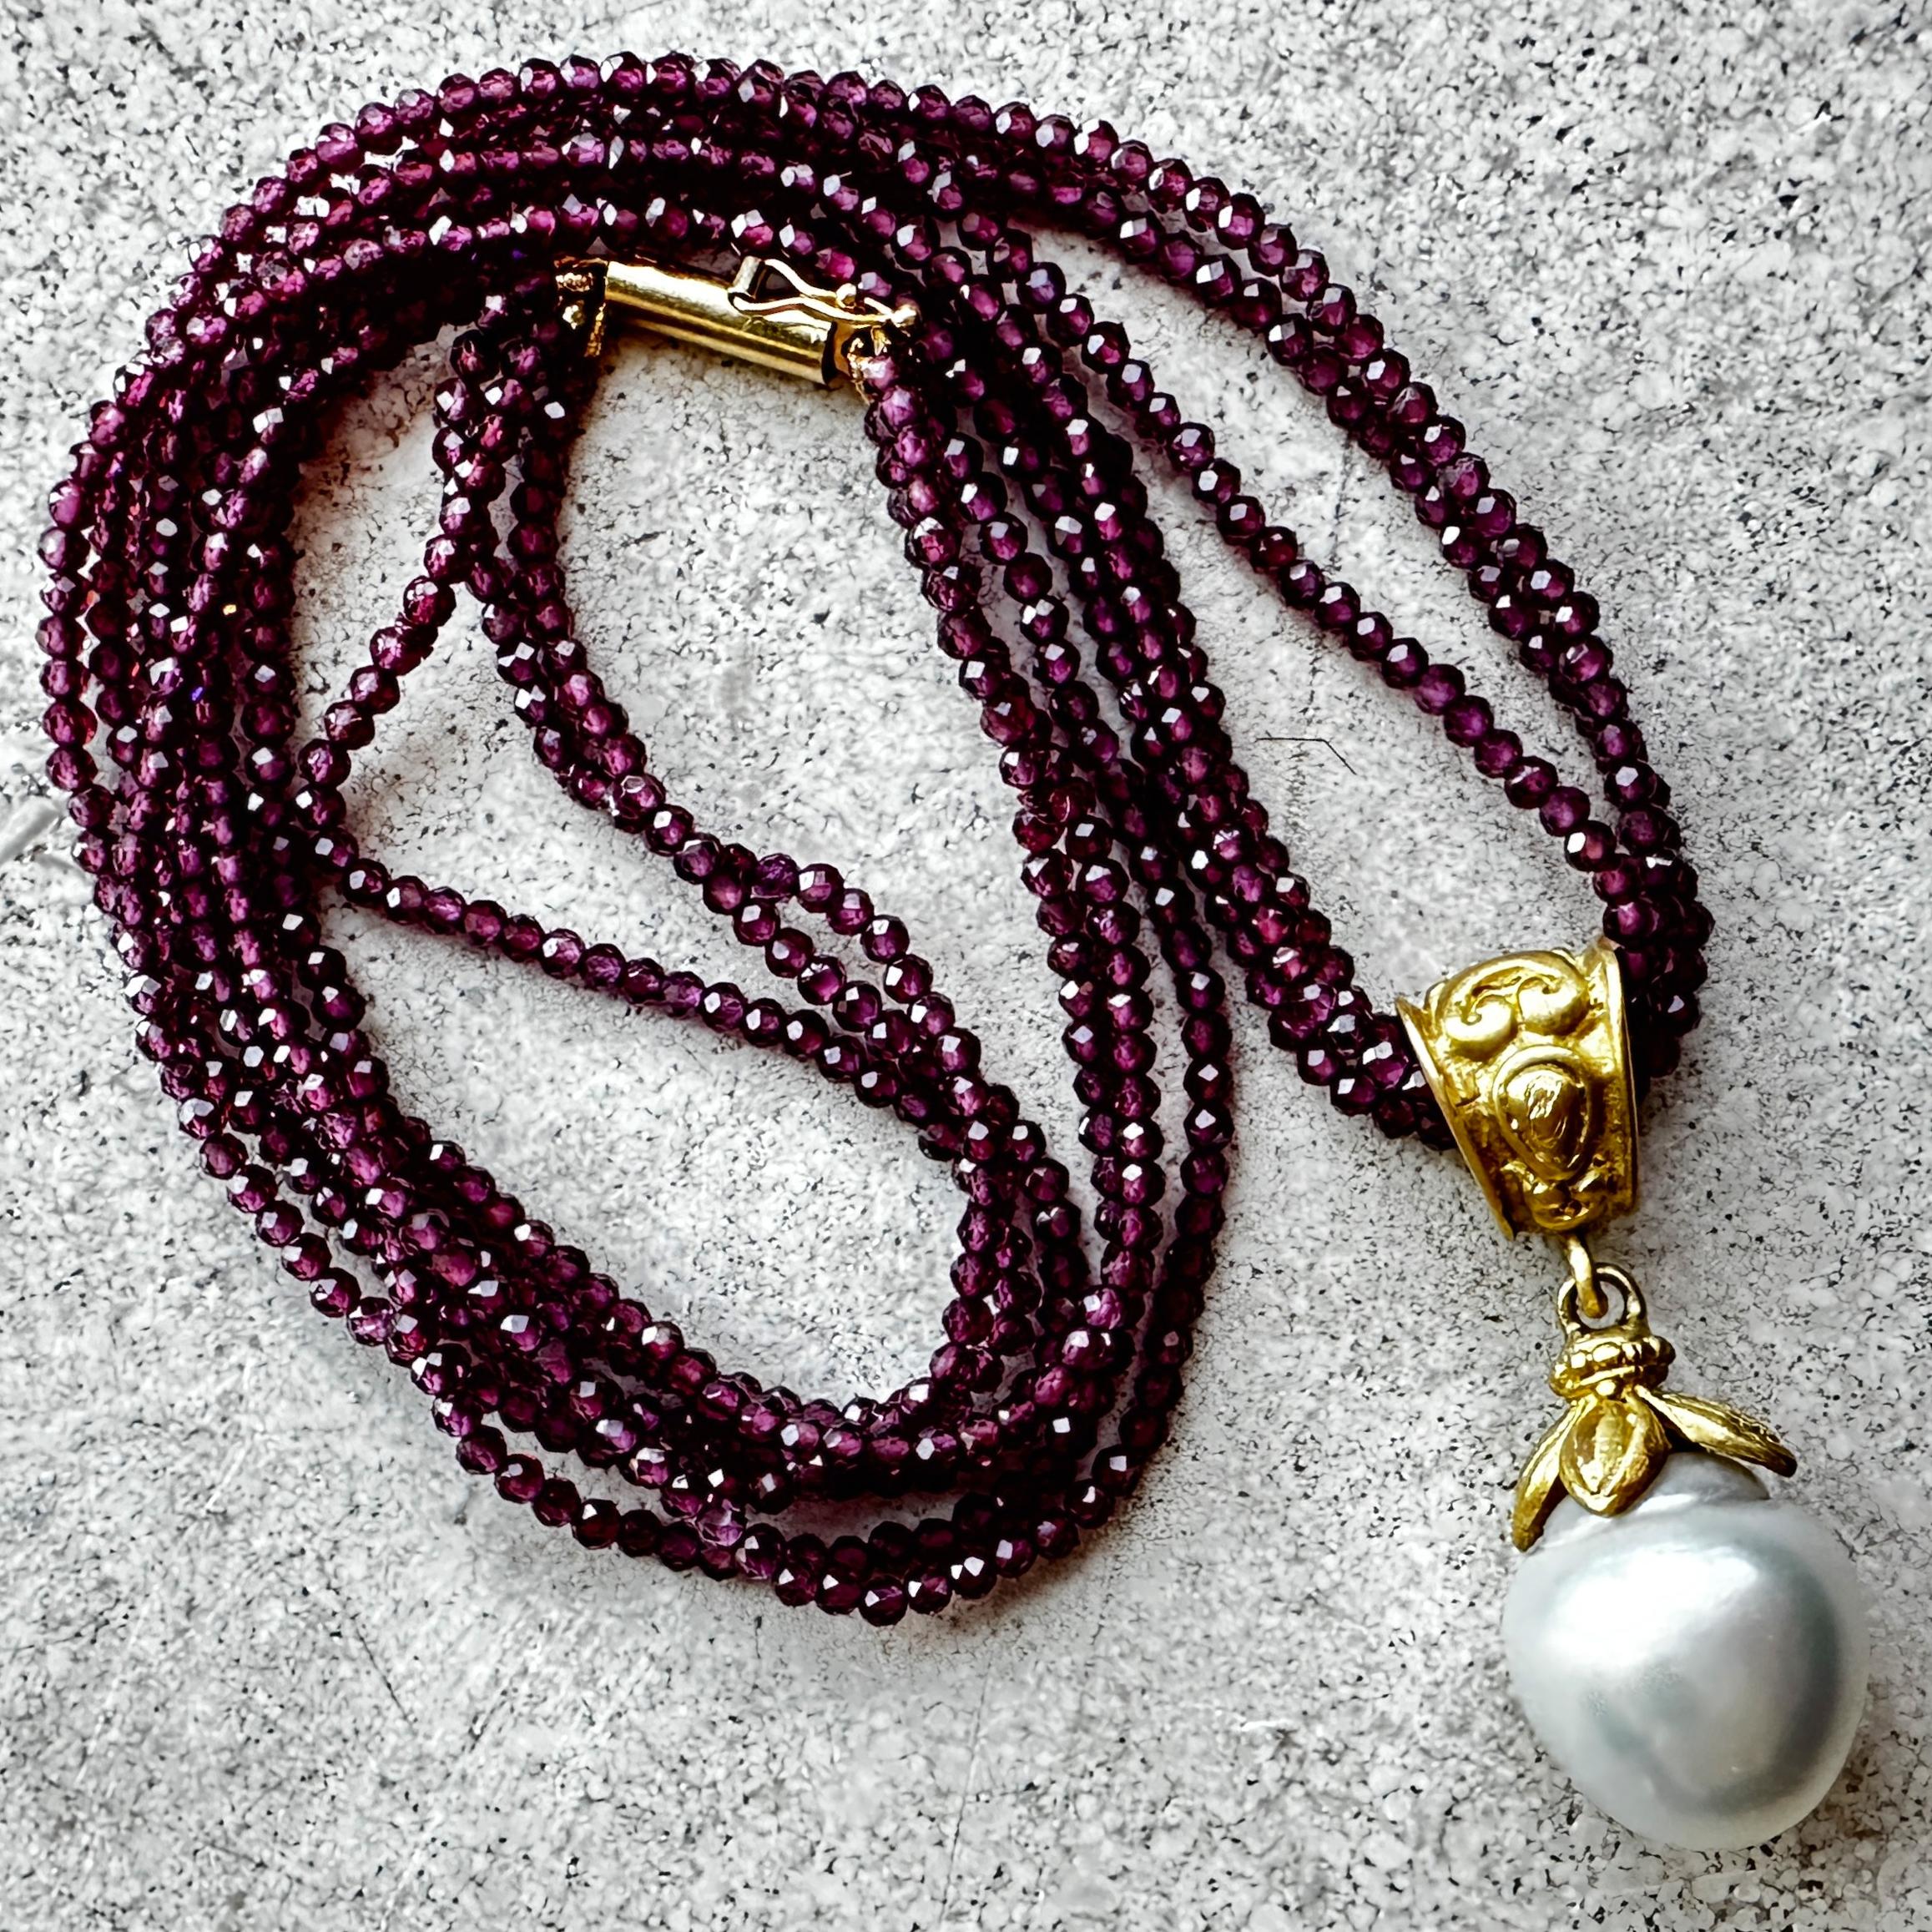 Baroque 13mm South Sea Pearl in 18K Gold Fob Pendant with Rhodolite Necklace For Sale 4